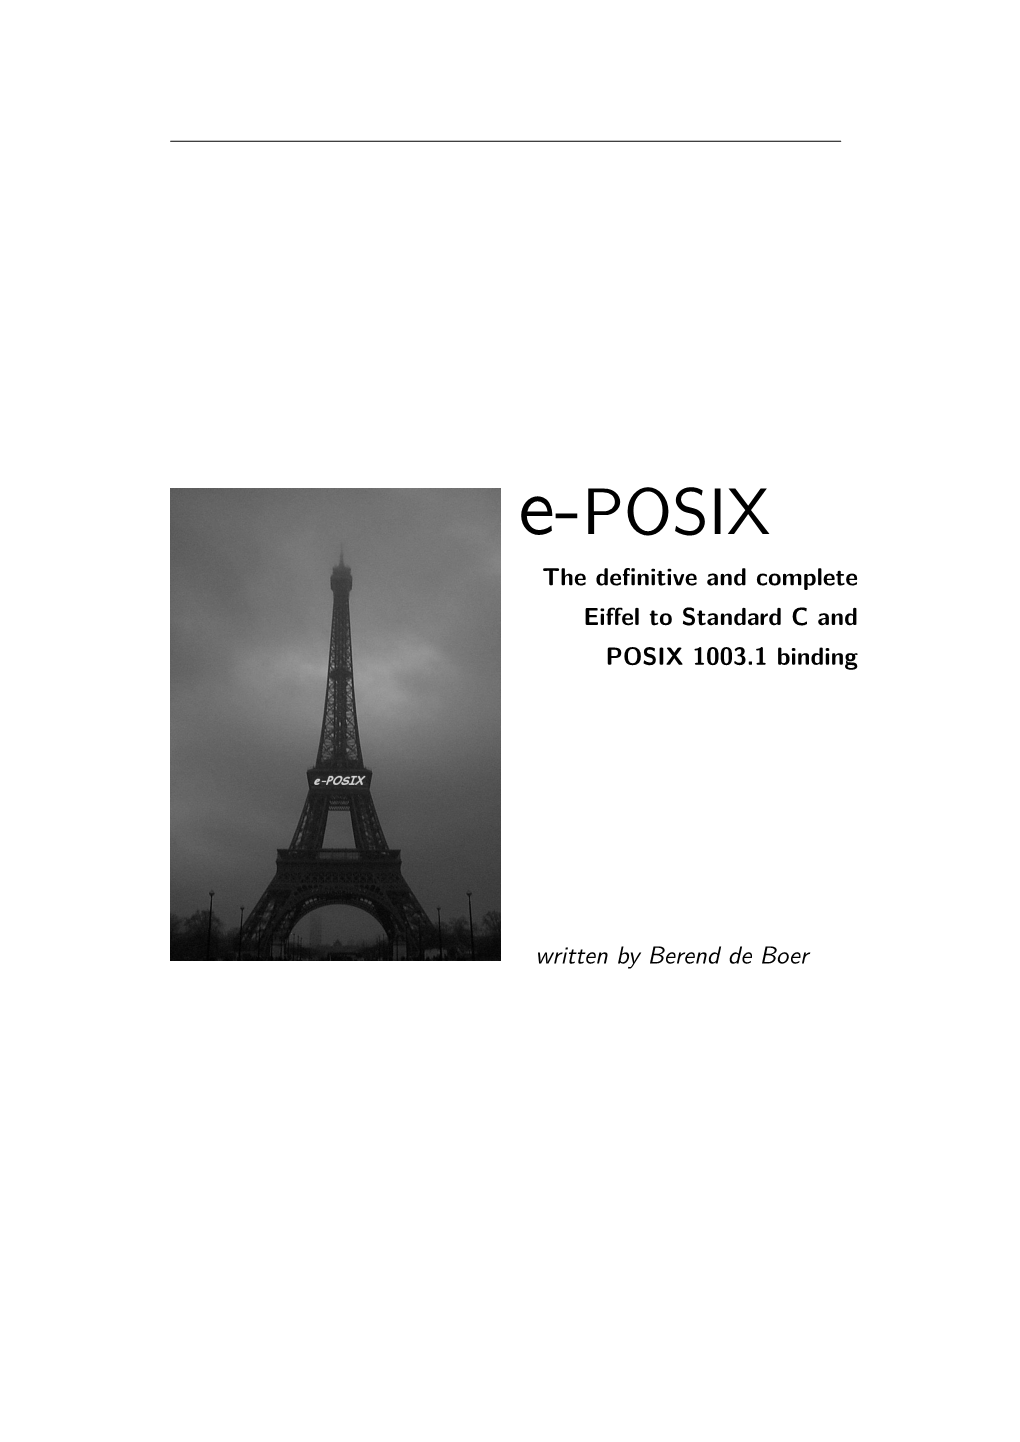 E-POSIX the Deﬁnitive and Complete Eiﬀel to Standard C and POSIX 1003.1 Binding